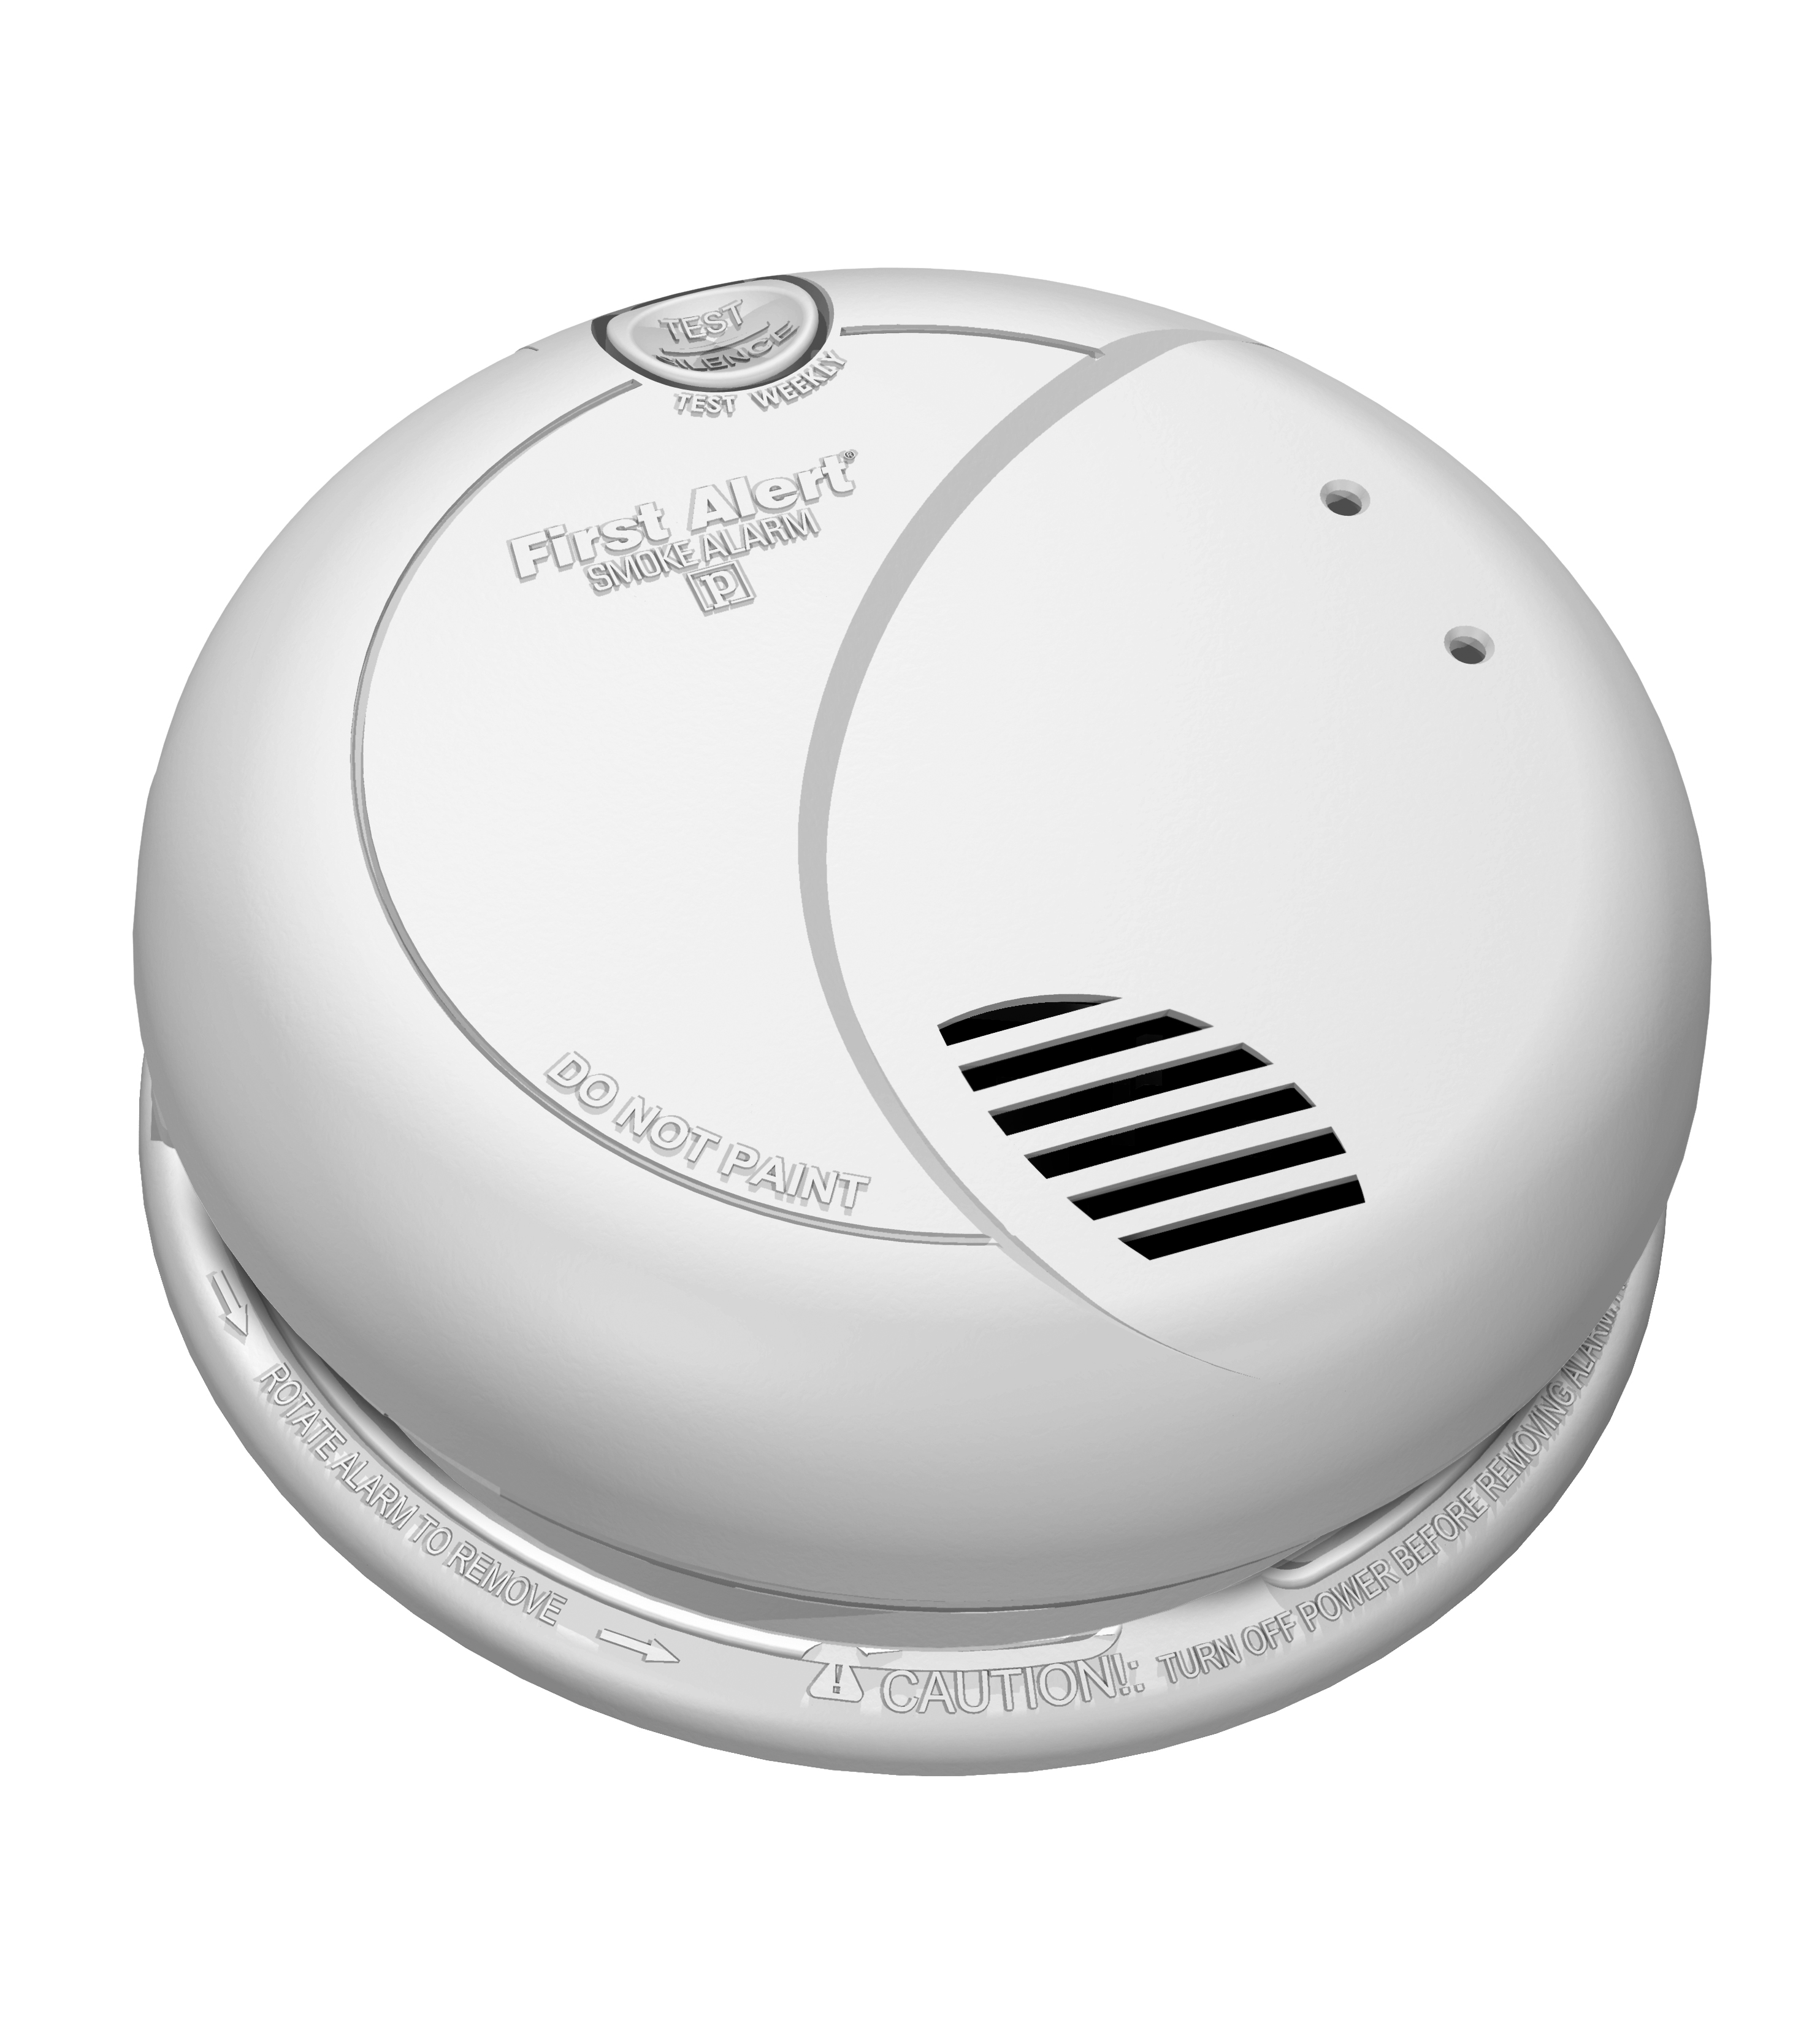 Hardwired smoke alarm with battery back-up meets codes where a photoelectric smoke sensor is required for new construction.